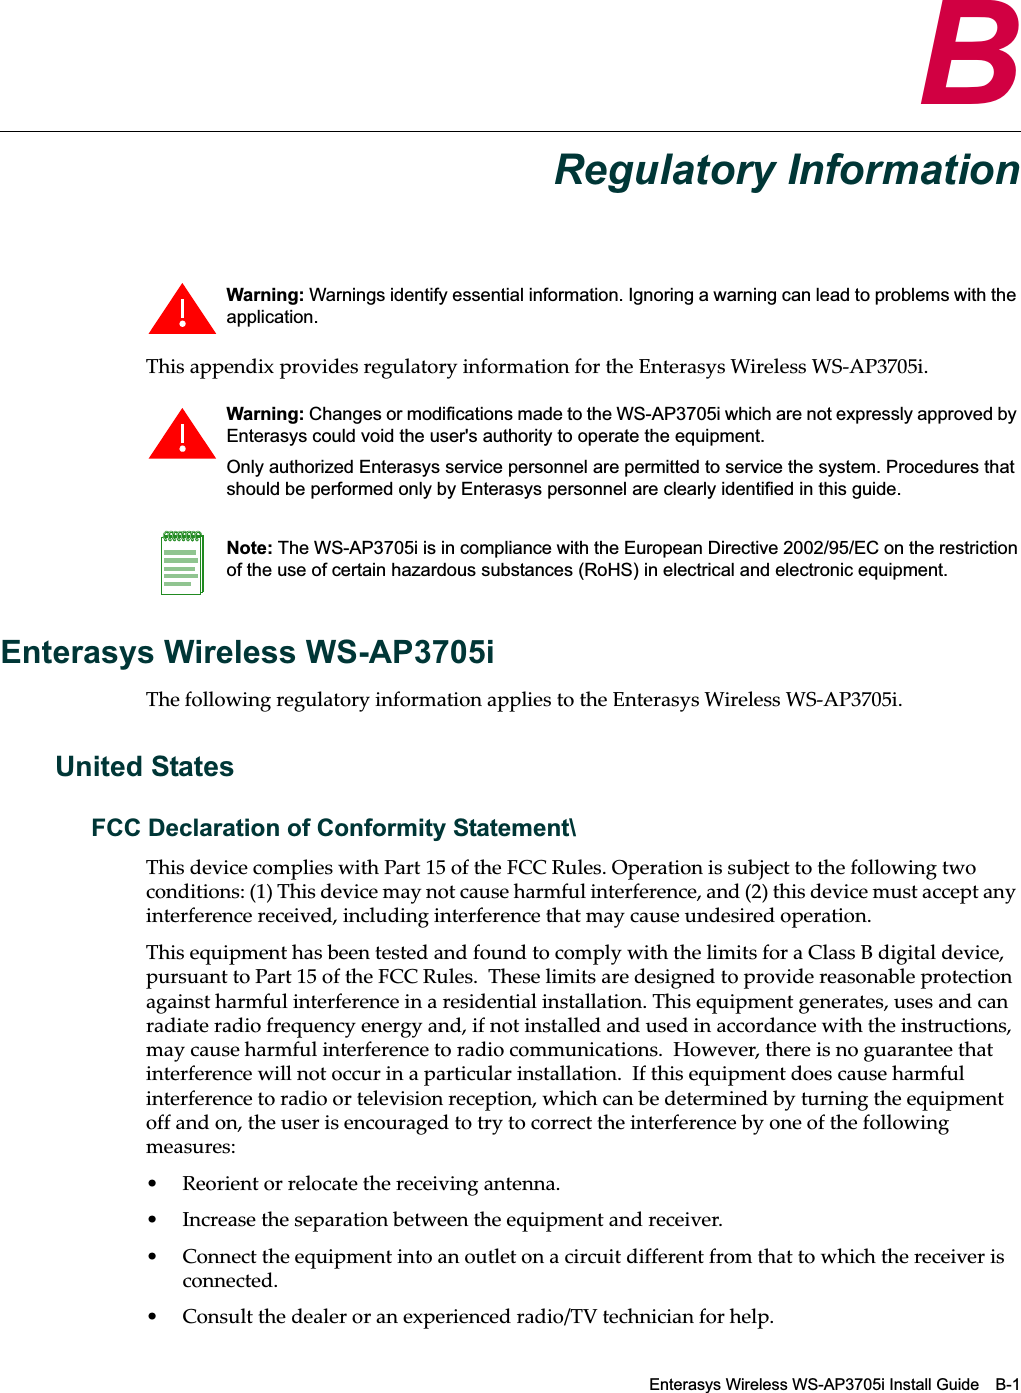 Enterasys Wireless WS-AP3705i Install Guide B-1BRegulatory InformationThis appendix provides regulatory information for the Enterasys Wireless WS-AP3705i.Enterasys Wireless WS-AP3705iThe following regulatory information applies to the Enterasys Wireless WS-AP3705i.United StatesFCC Declaration of Conformity Statement\This device complies with Part 15 of the FCC Rules. Operation is subject to the following two conditions: (1) This device may not cause harmful interference, and (2) this device must accept any interference received, including interference that may cause undesired operation.This equipment has been tested and found to comply with the limits for a Class B digital device, pursuant to Part 15 of the FCC Rules.  These limits are designed to provide reasonable protection against harmful interference in a residential installation. This equipment generates, uses and can radiate radio frequency energy and, if not installed and used in accordance with the instructions, may cause harmful interference to radio communications.  However, there is no guarantee that interference will not occur in a particular installation.  If this equipment does cause harmful interference to radio or television reception, which can be determined by turning the equipment off and on, the user is encouraged to try to correct the interference by one of the following measures:• Reorient or relocate the receiving antenna.• Increase the separation between the equipment and receiver.• Connect the equipment into an outlet on a circuit different from that to which the receiver is connected.• Consult the dealer or an experienced radio/TV technician for help.Warning: Warnings identify essential information. Ignoring a warning can lead to problems with the application.Warning: Changes or modifications made to the WS-AP3705i which are not expressly approved by Enterasys could void the user&apos;s authority to operate the equipment.Only authorized Enterasys service personnel are permitted to service the system. Procedures that should be performed only by Enterasys personnel are clearly identified in this guide.Note: The WS-AP3705i is in compliance with the European Directive 2002/95/EC on the restriction of the use of certain hazardous substances (RoHS) in electrical and electronic equipment.Draft